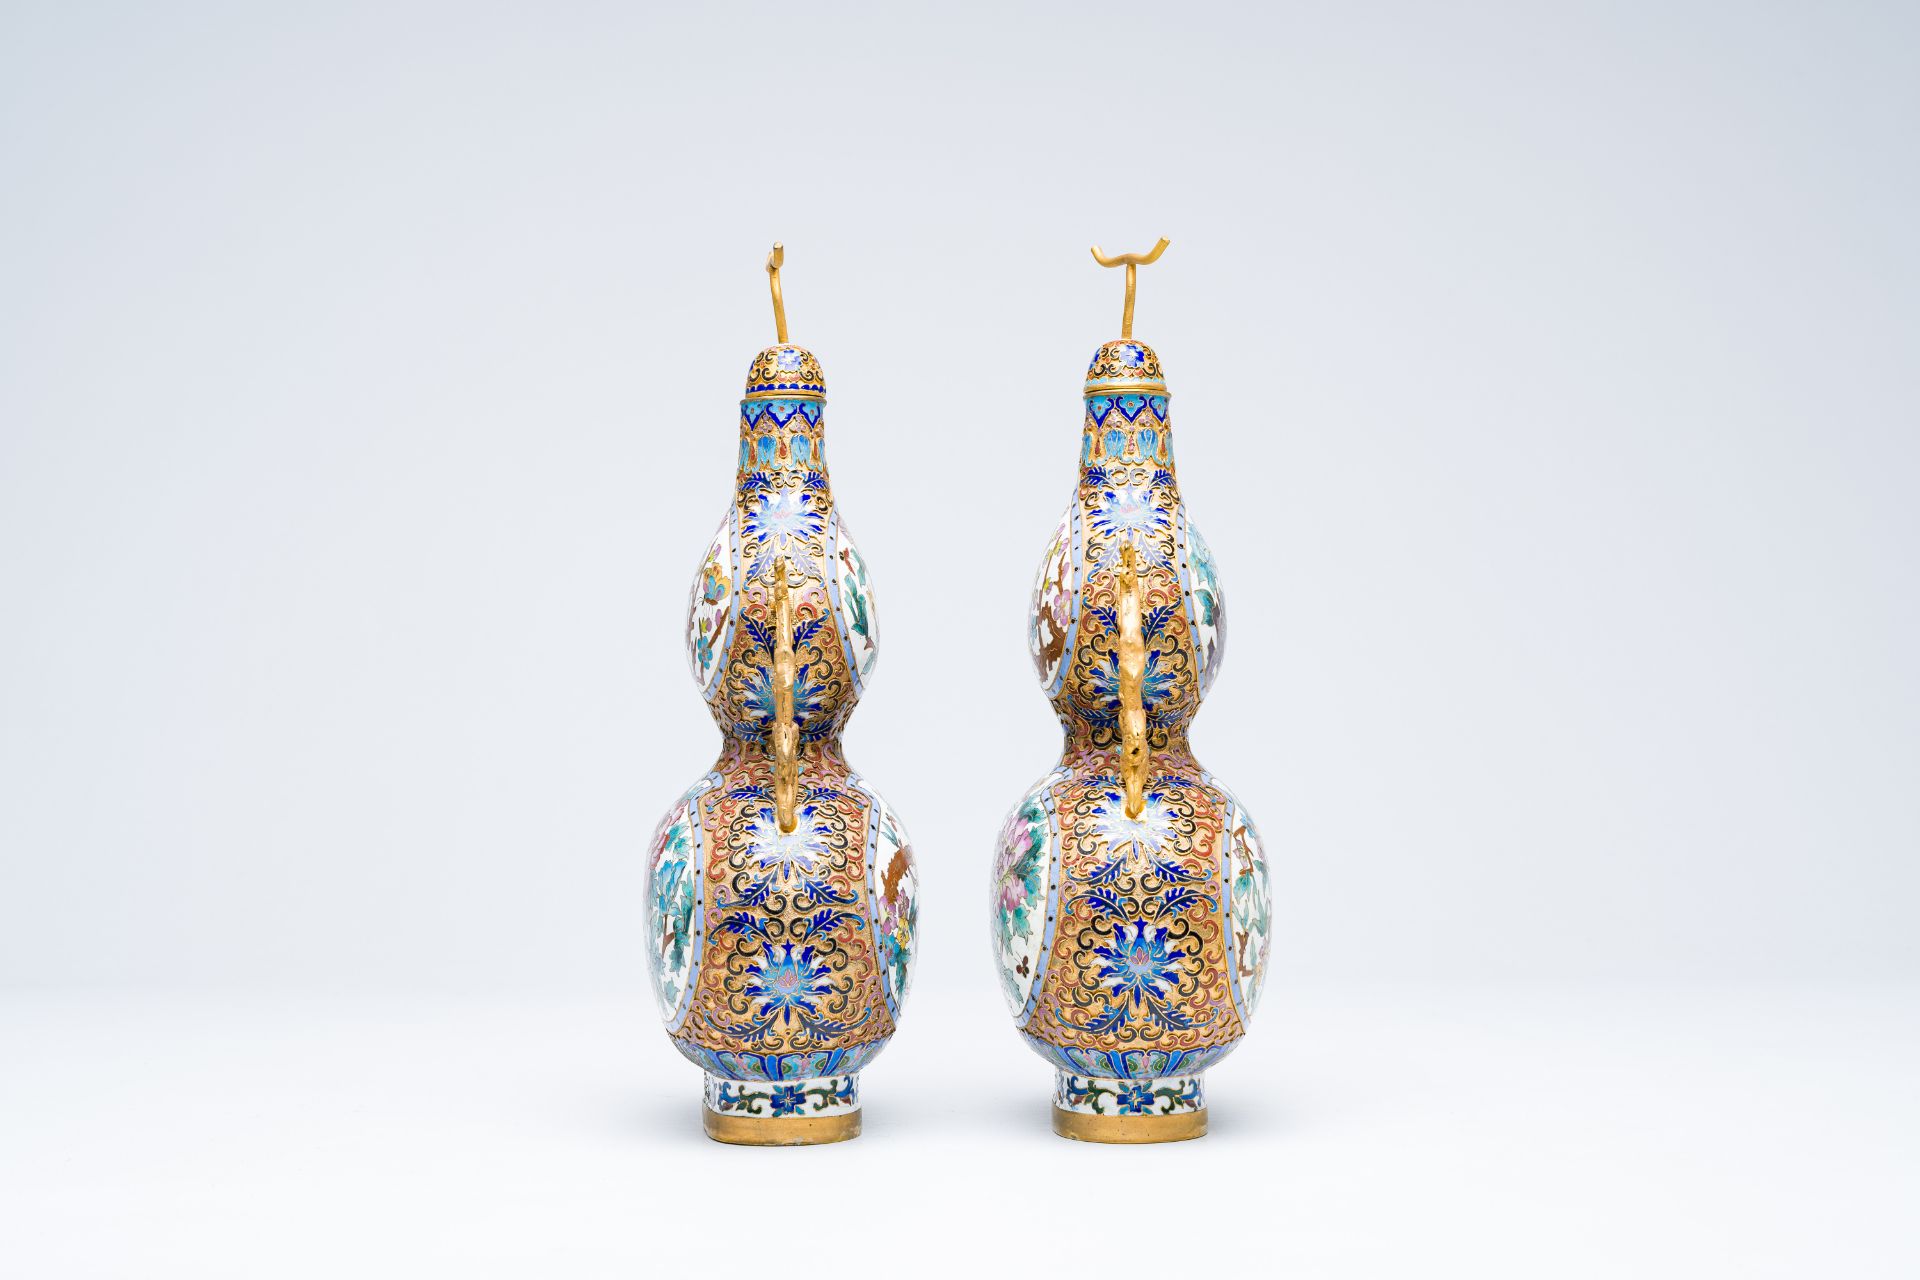 A pair of Chinese cloisonne double gourd vases on wooden stands, 20th C. - Image 5 of 9